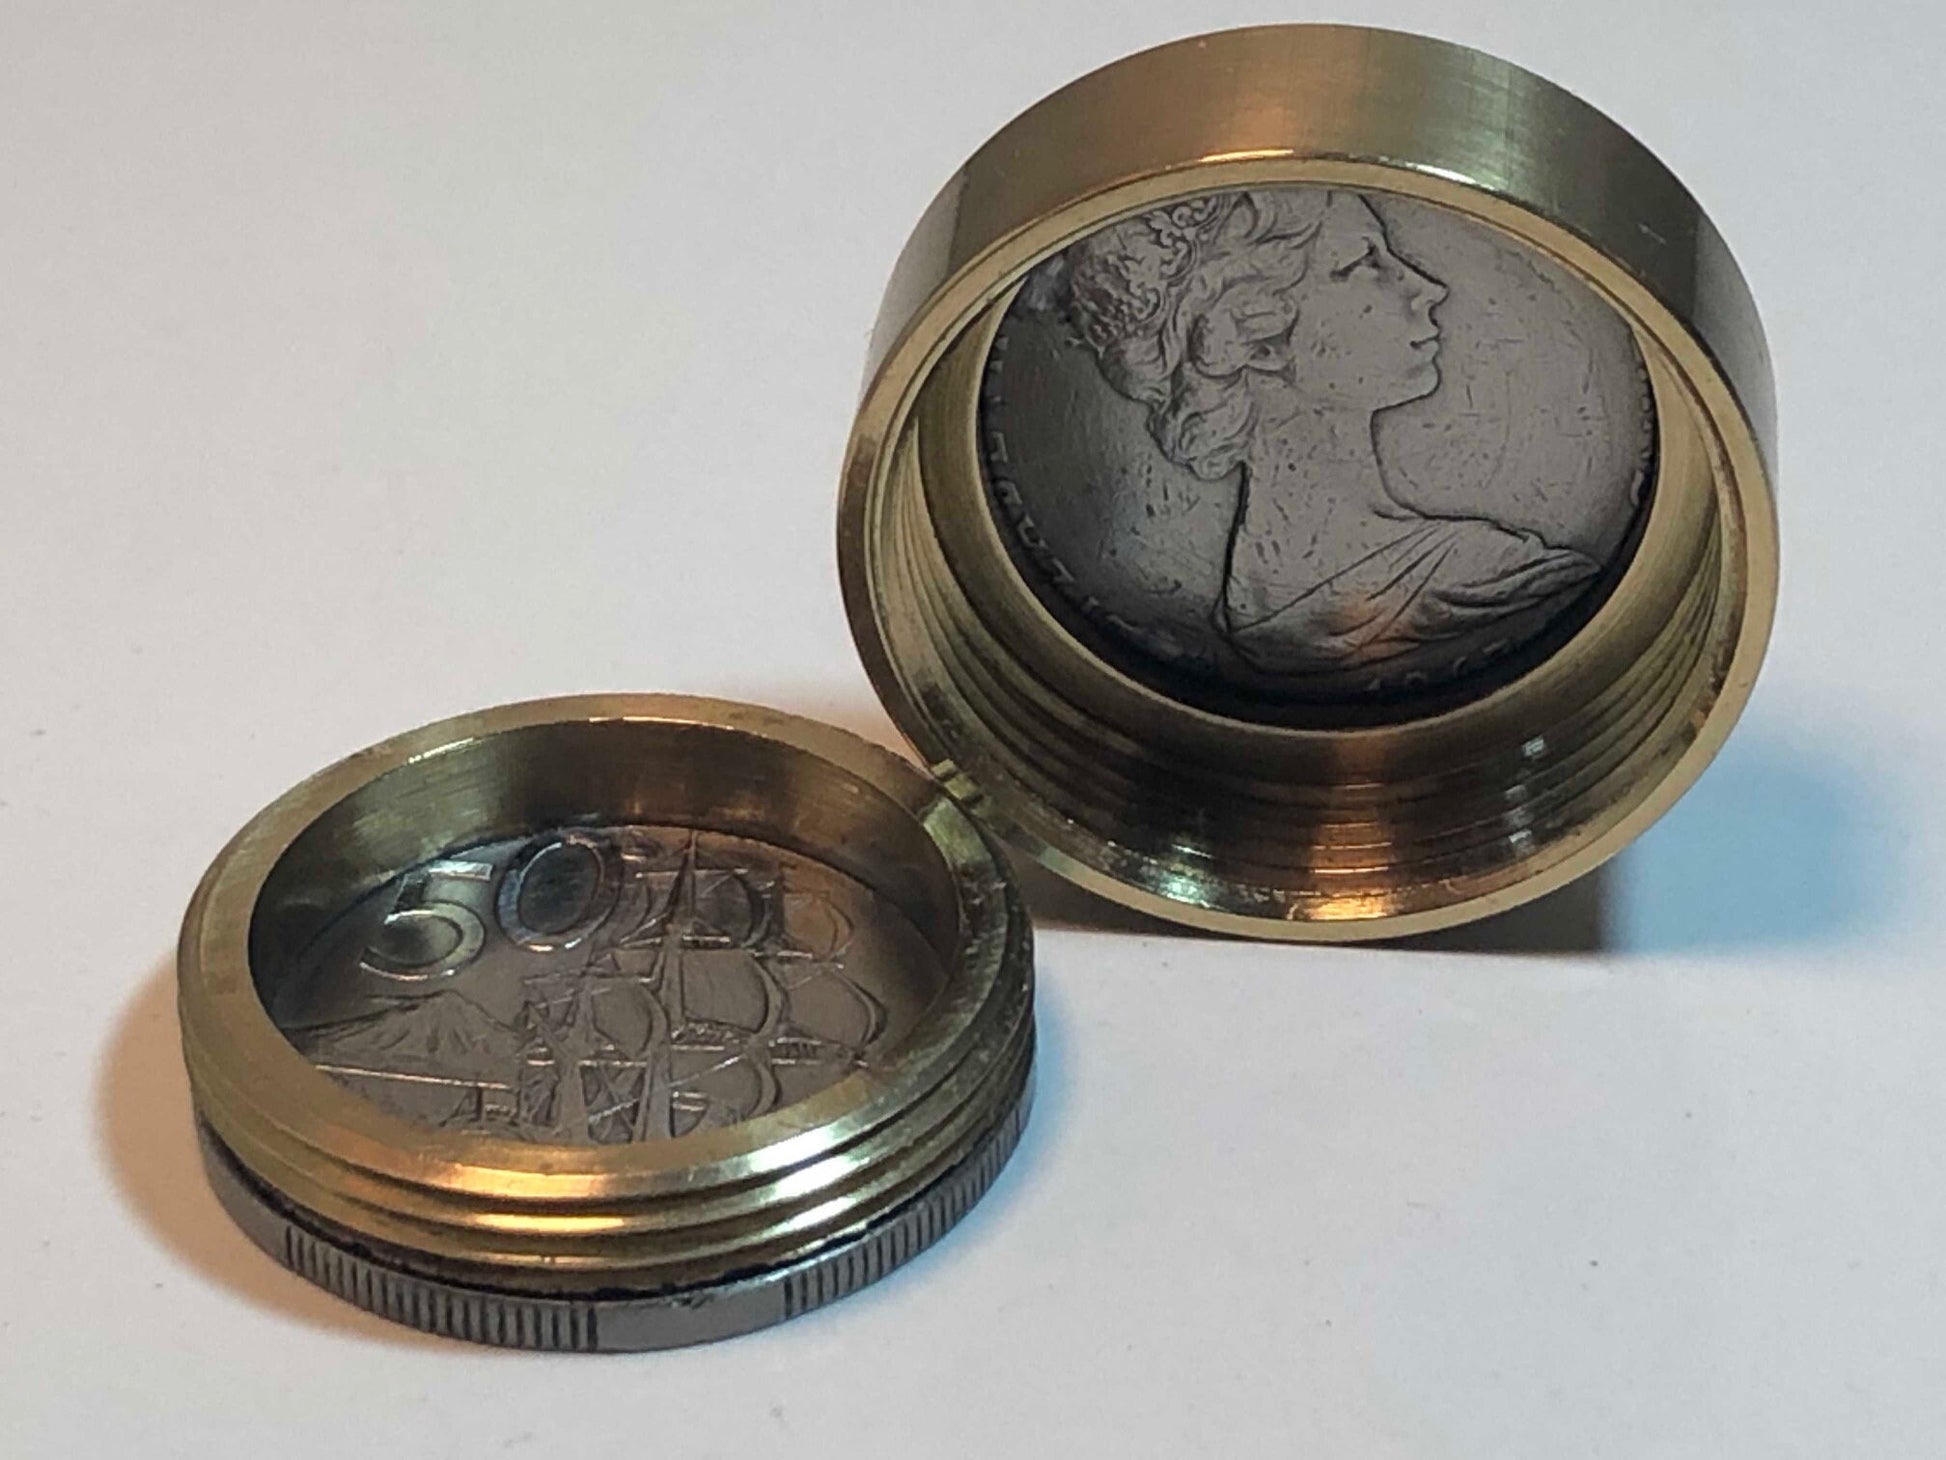 New Zealand Coin Pillbox Fifty Cents- Vintage Antique Stash Snuff Box, Keepsake, Men's Gift, Jewelry, World Coin Collector